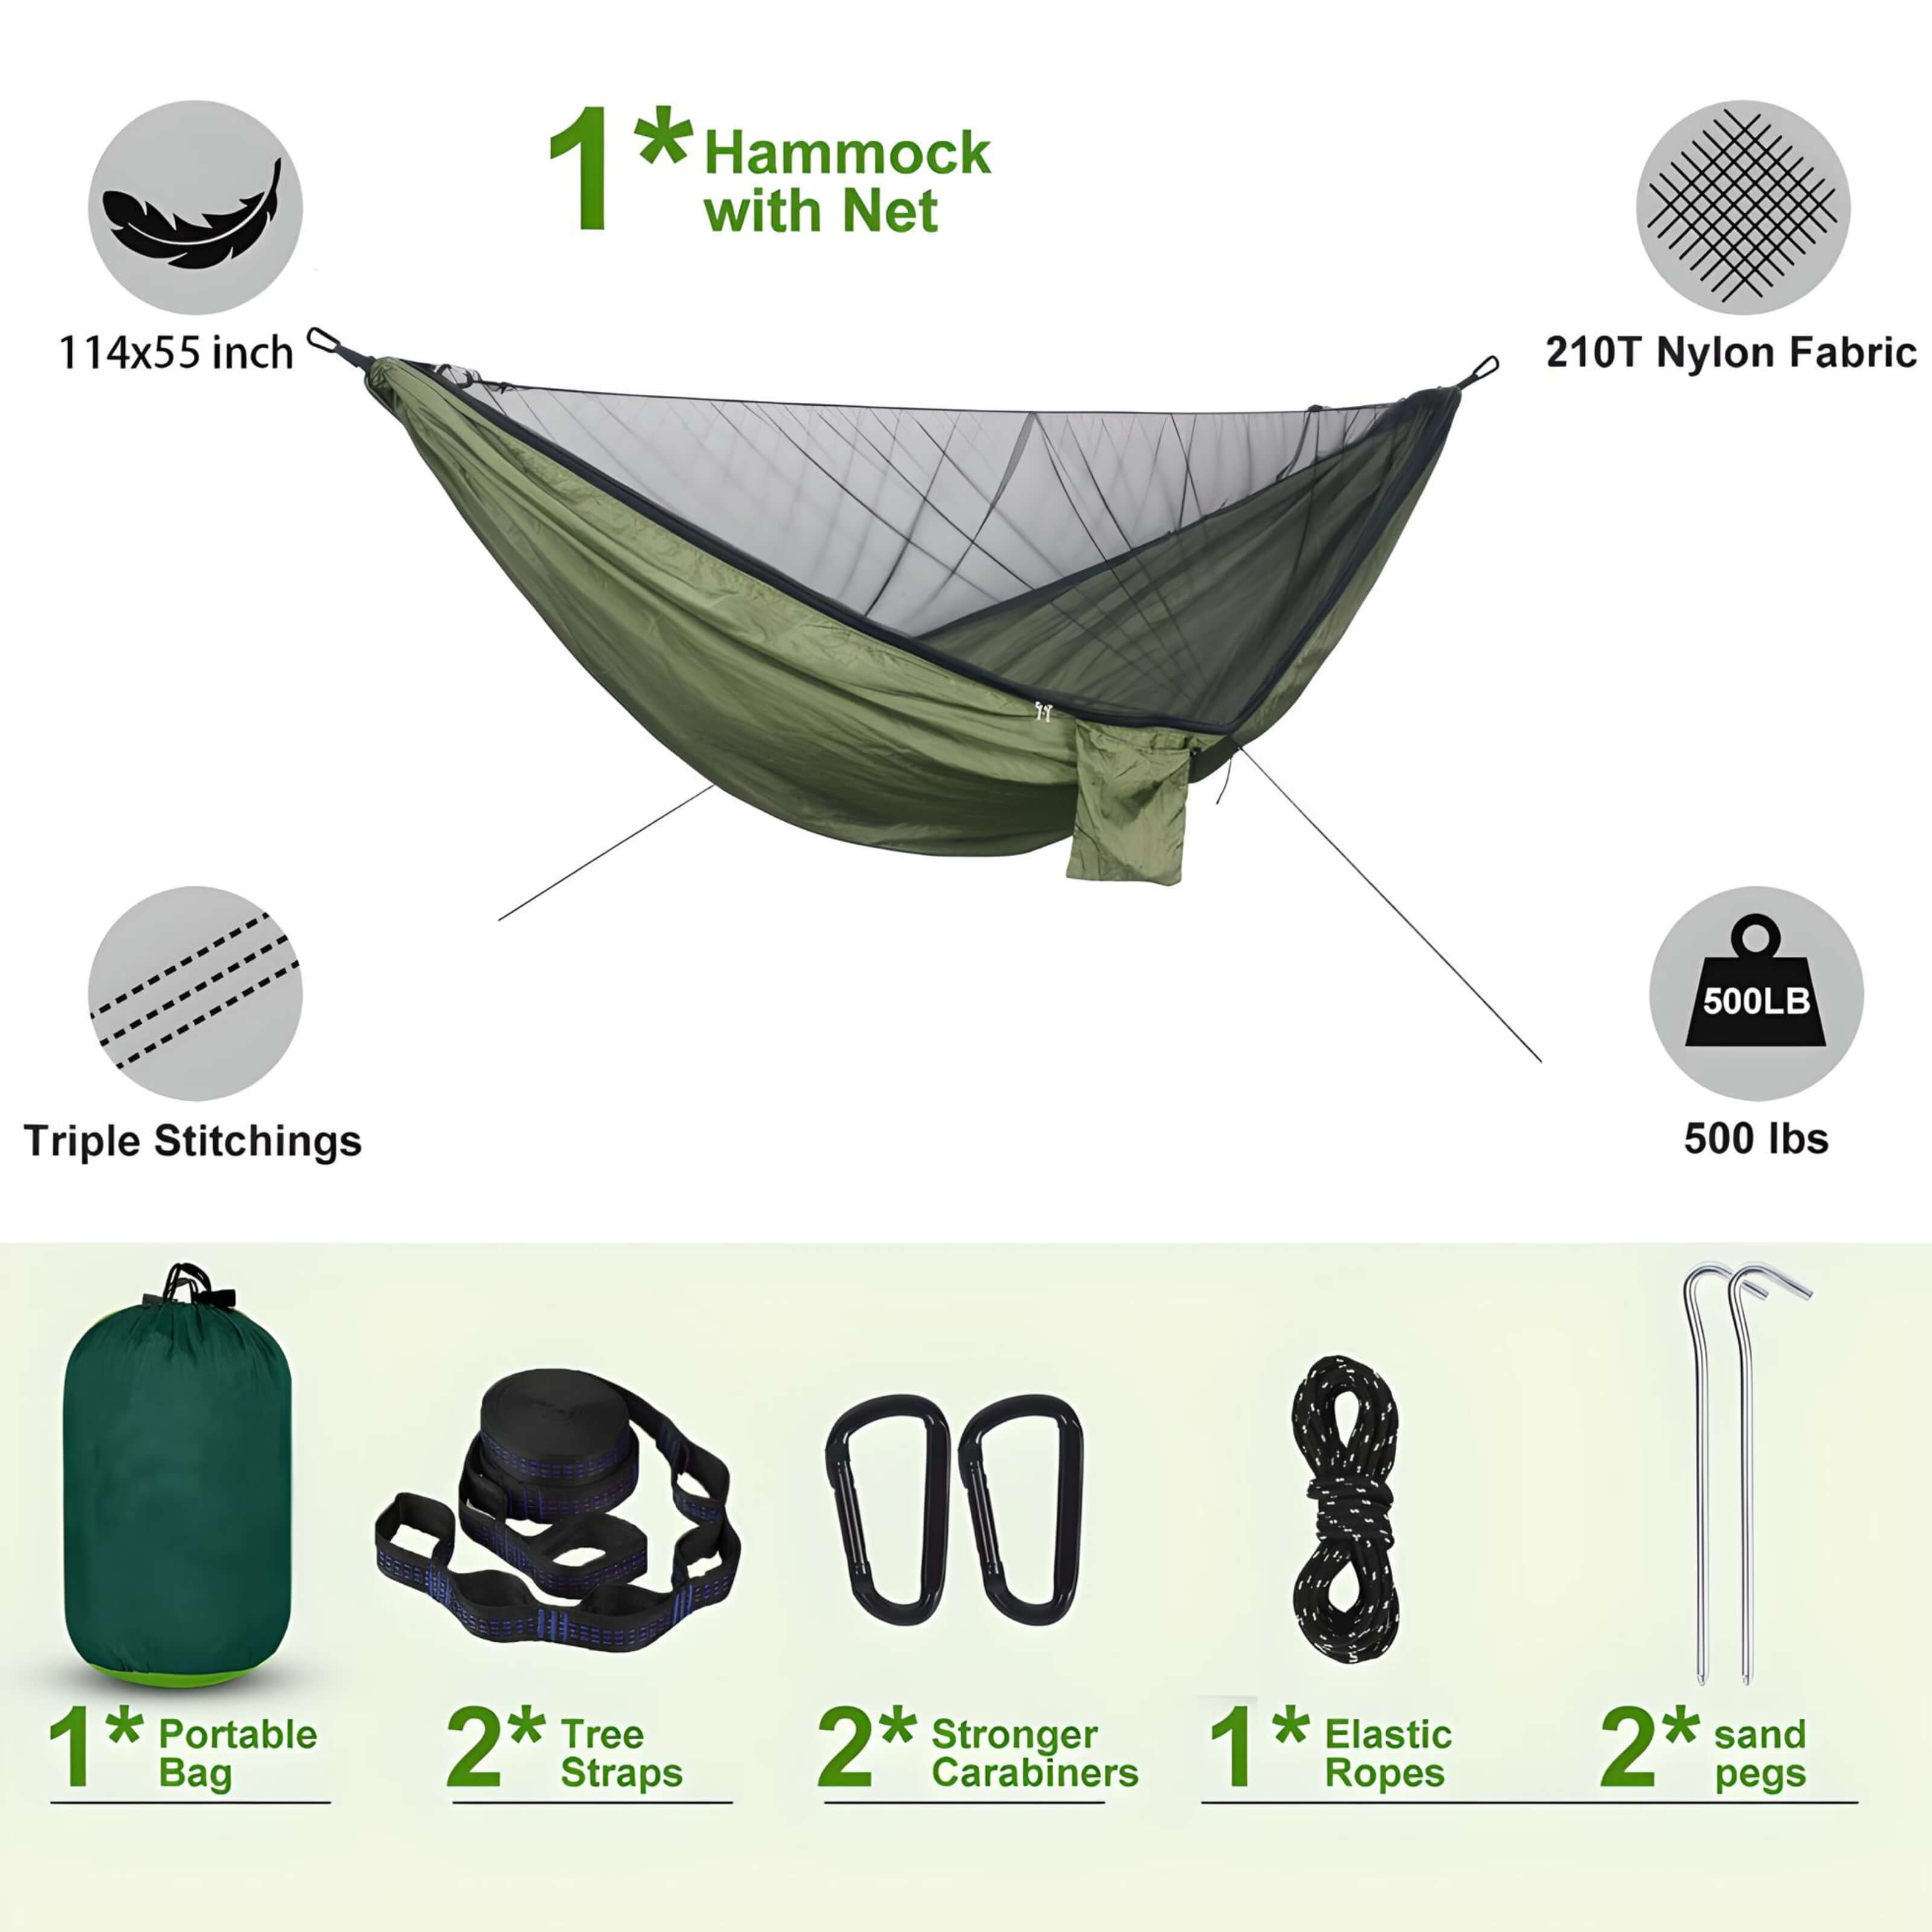    covacure-hammock-package-content